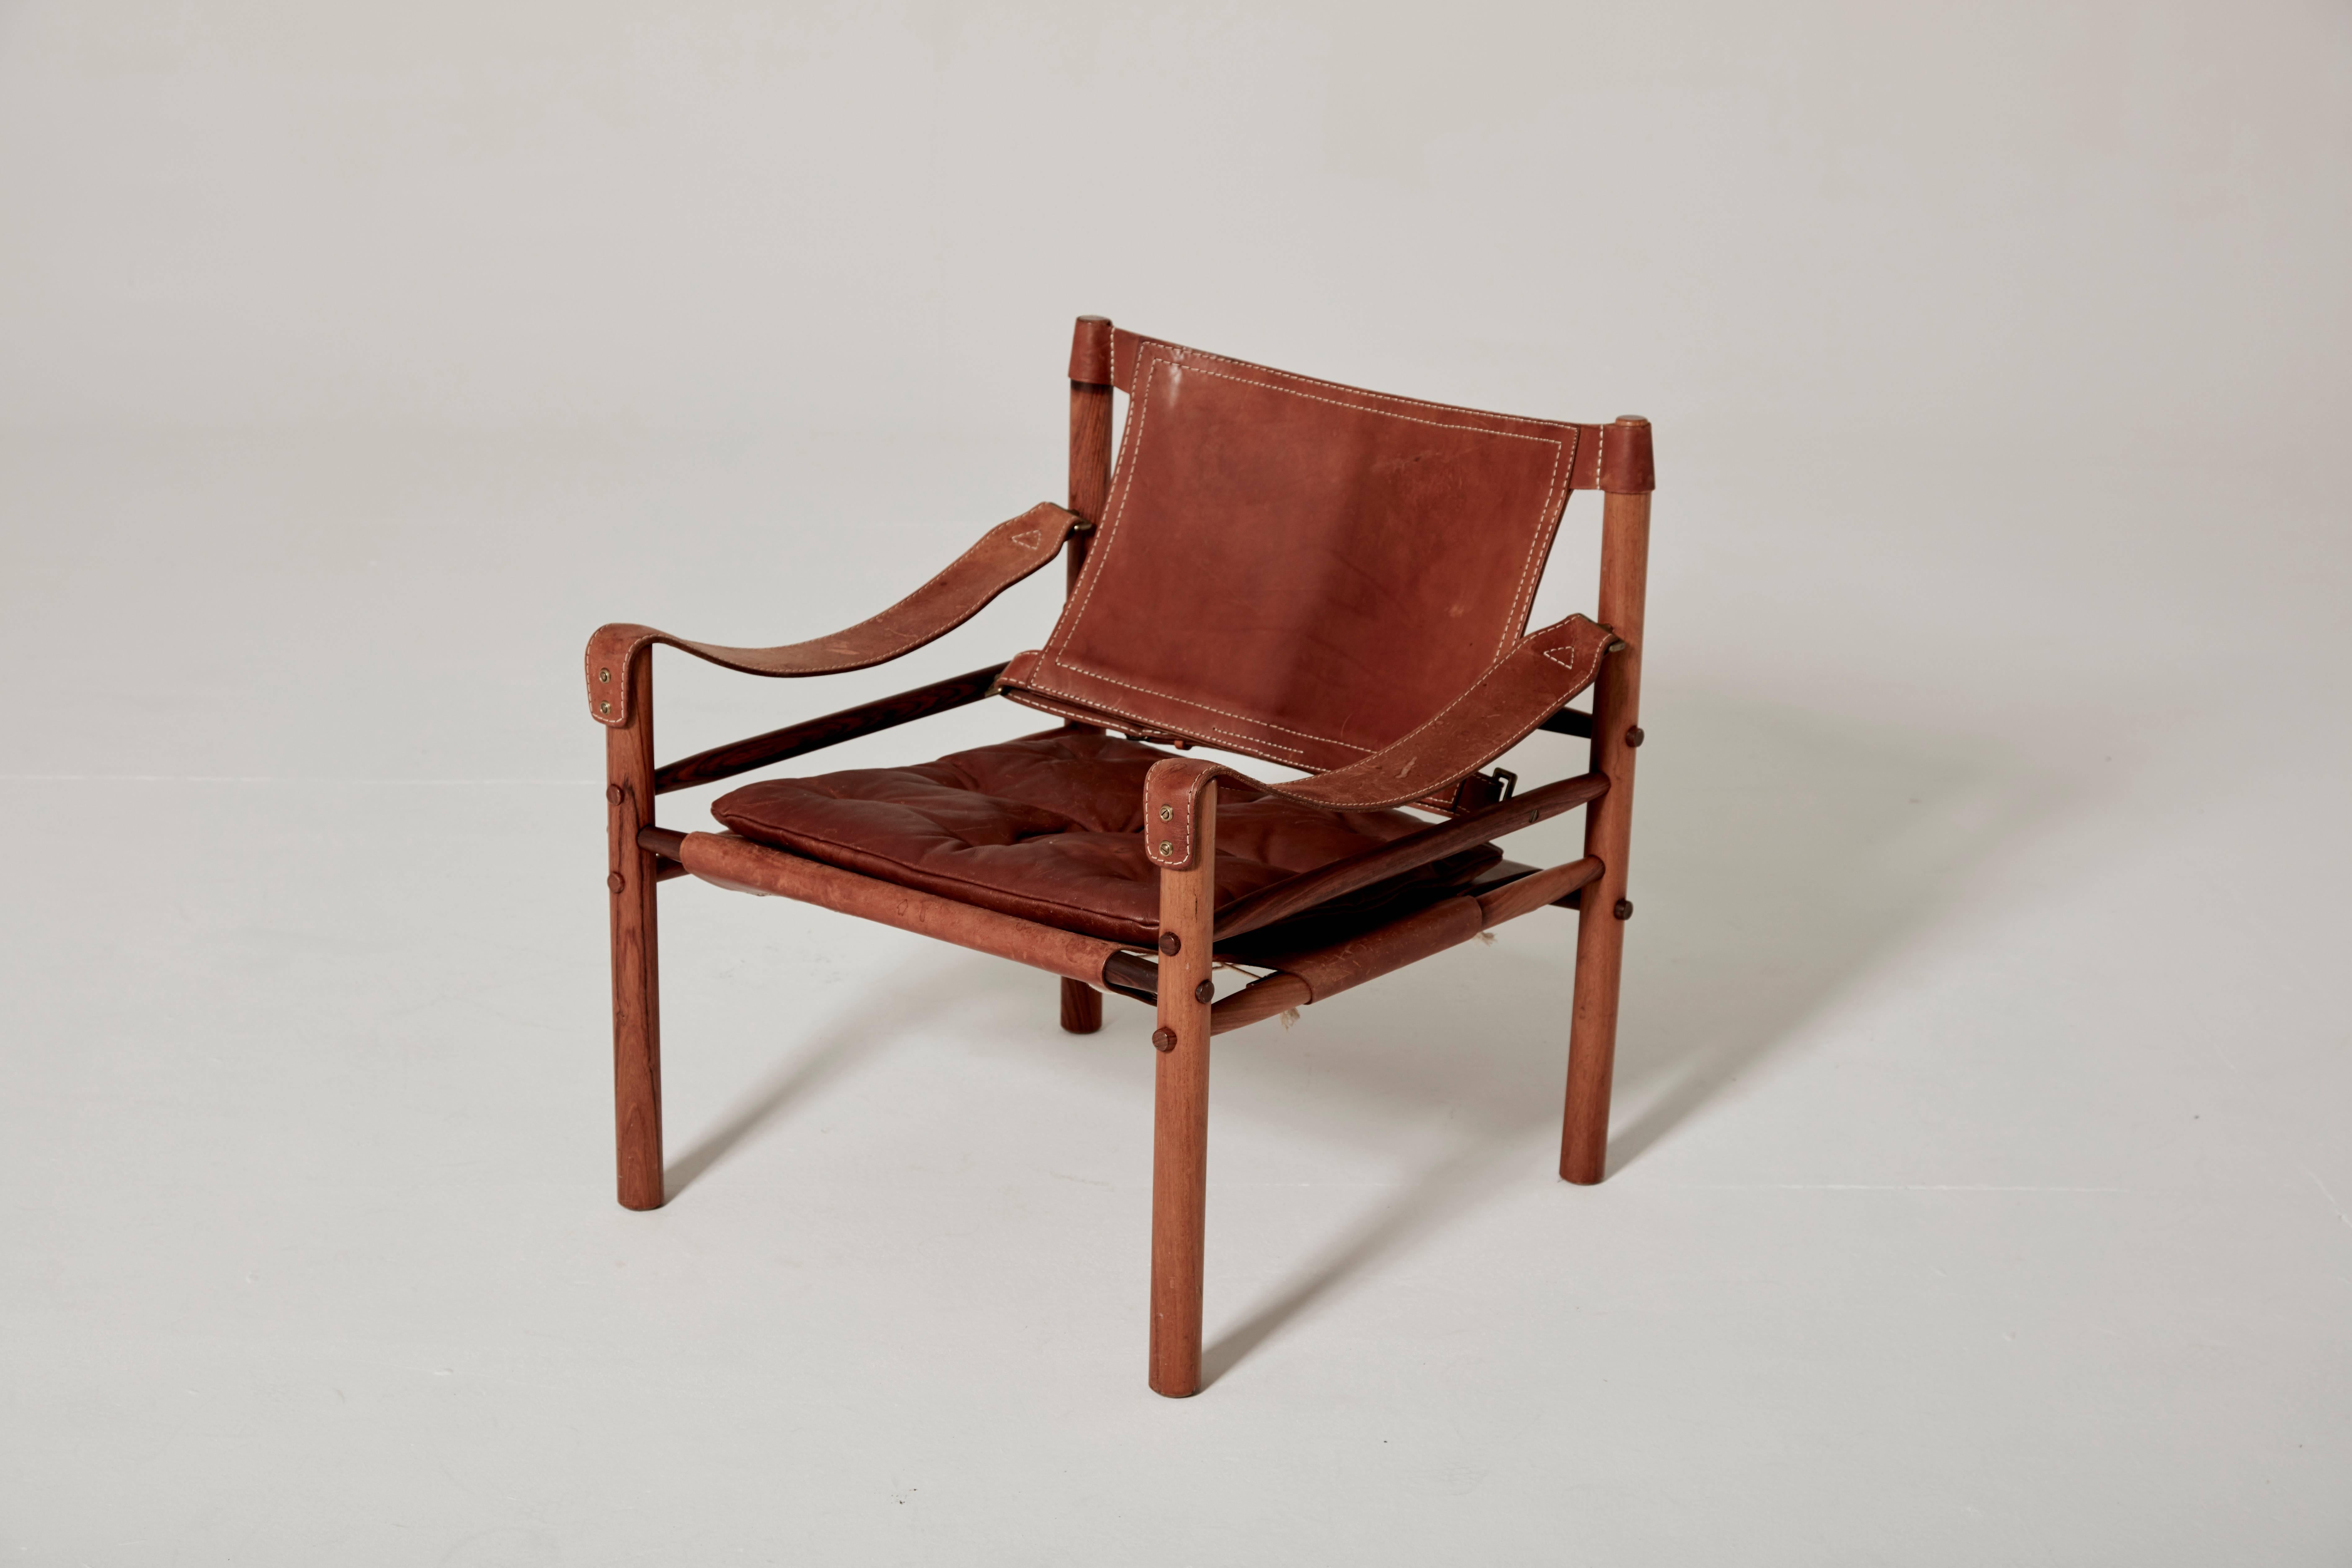 Arne Norell safari chair, brown leather and rosewood, Sweden, 1970s.